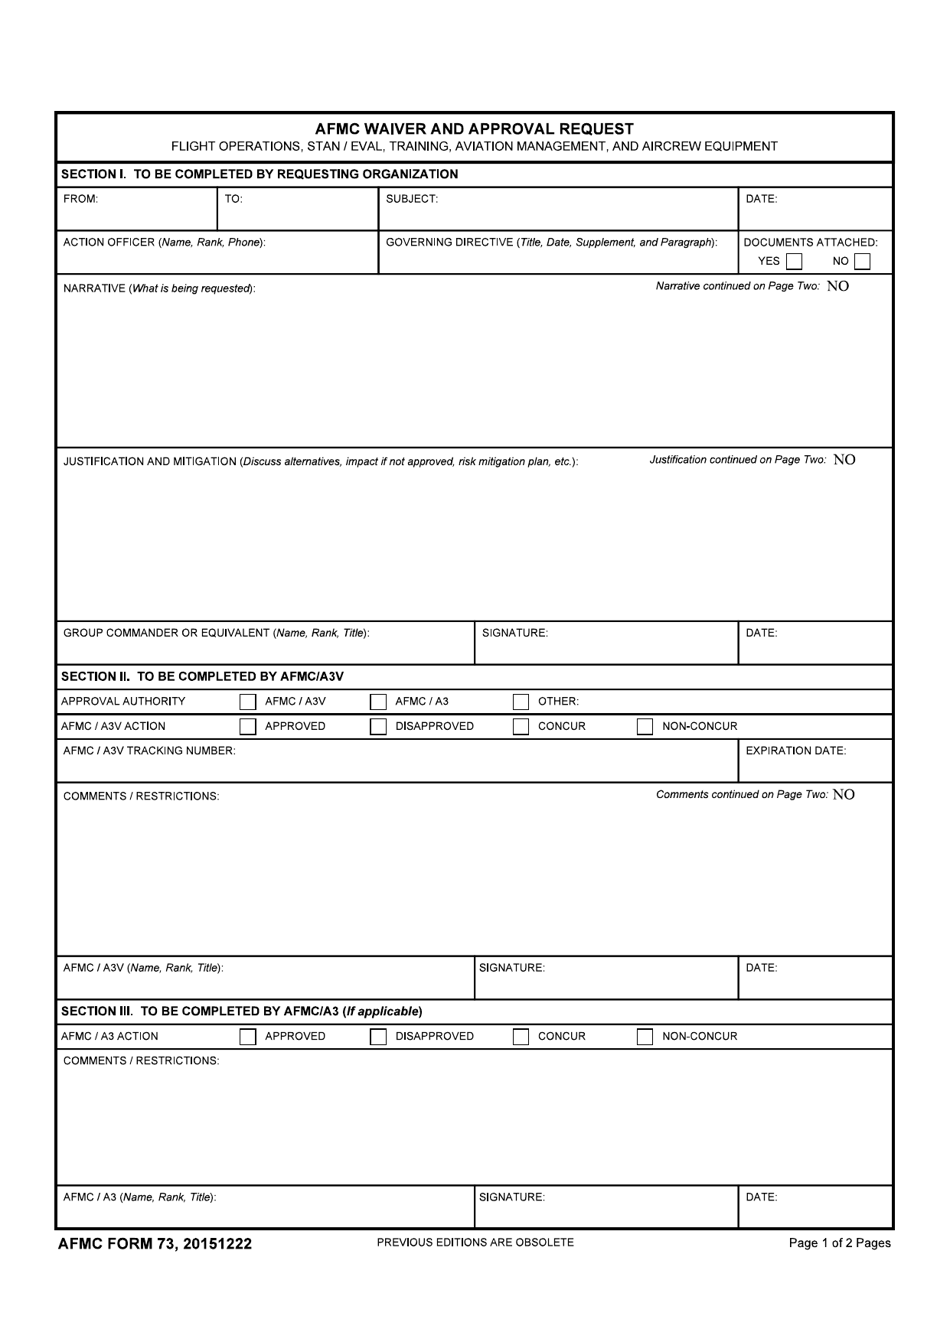 AFMC Form 73 Afmc Waiver and Approval Request, Page 1